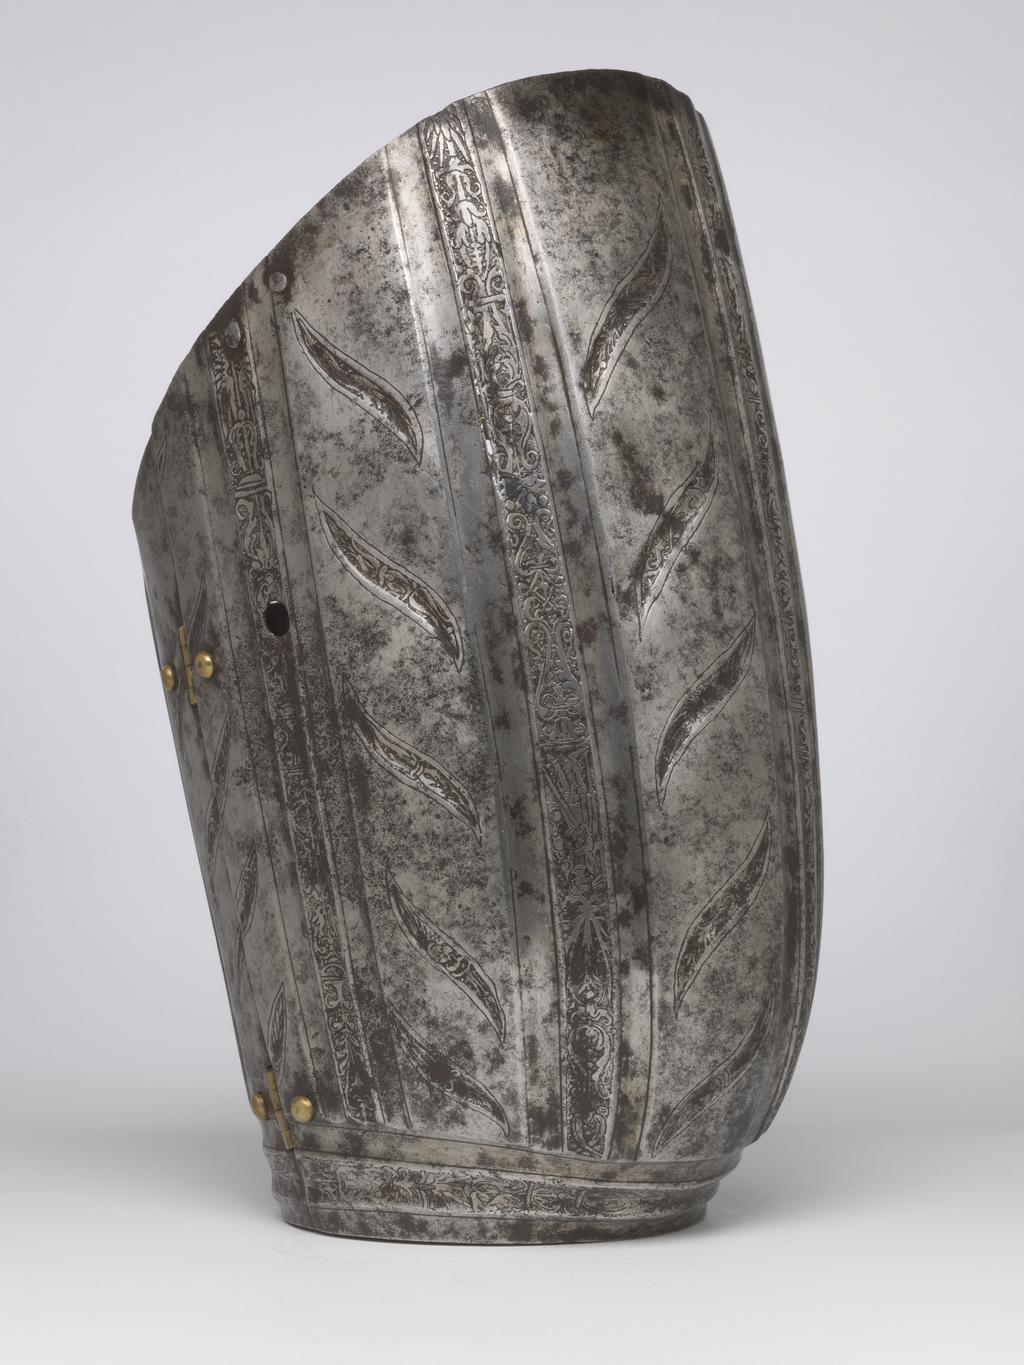 An image of Armour. Couter and lower cannon of a vambrace for the right arm, for parade use, with 'puffed-and-slashed' decoration in imitation of civilian costume. Production Place: South Germany. Helmschmied, Koloman (German, 1470/71-1532). The couter is formed of a single, large, shell-like plate, open at the rear and strongly shaped to the point of the elbow. Its outer edge is nearly straight. Its upper and lower edges are convex and converge at the inside of the elbow in a strong, medial pucker. The upper and lower edges have inward turns, roped with pairs of incised lines. The turns are each accompanied by a recessed border which is itself accompanied on the front by a flute separated from the border by a raised rib emphasised by a pair of incised lines. The boss over the elbow is enclosed by two groups of three flutes, each emphasised by pairs of incised lines, that converge to the inside of the elbow. Two vertical groups of such flutes decorate the front of the couter both above and below the boss, while three more decorate the boss itself. The broad bands intervening between these groups of flutes are decorated with slender, diagonal, slightly recurved, recessed 'slashes' in imitation of those found on contemporary civilian costume. The front and rear of the central boss are each fitted with a pair of horizontally-aligned rivets for the attachment of a missing pair of vertical internal leathers that formerly connected the couter to the upper and lower cannons of the vambrace. The outer end of the couter is filled with a pair of widely-spaced, externally-flush rivets for the attachment of a missing bifurcated strap that terminated in a buckle to receive the missing strap that was formerly retained internally by a brass-capped, round-headed rivet and octagonal internal washer located just to the inside of the medial pucker, and passed around the rear of the elbow. The lower cannon is of tubular form, cut away in a concave curve towards the inside of the elbow, and constri